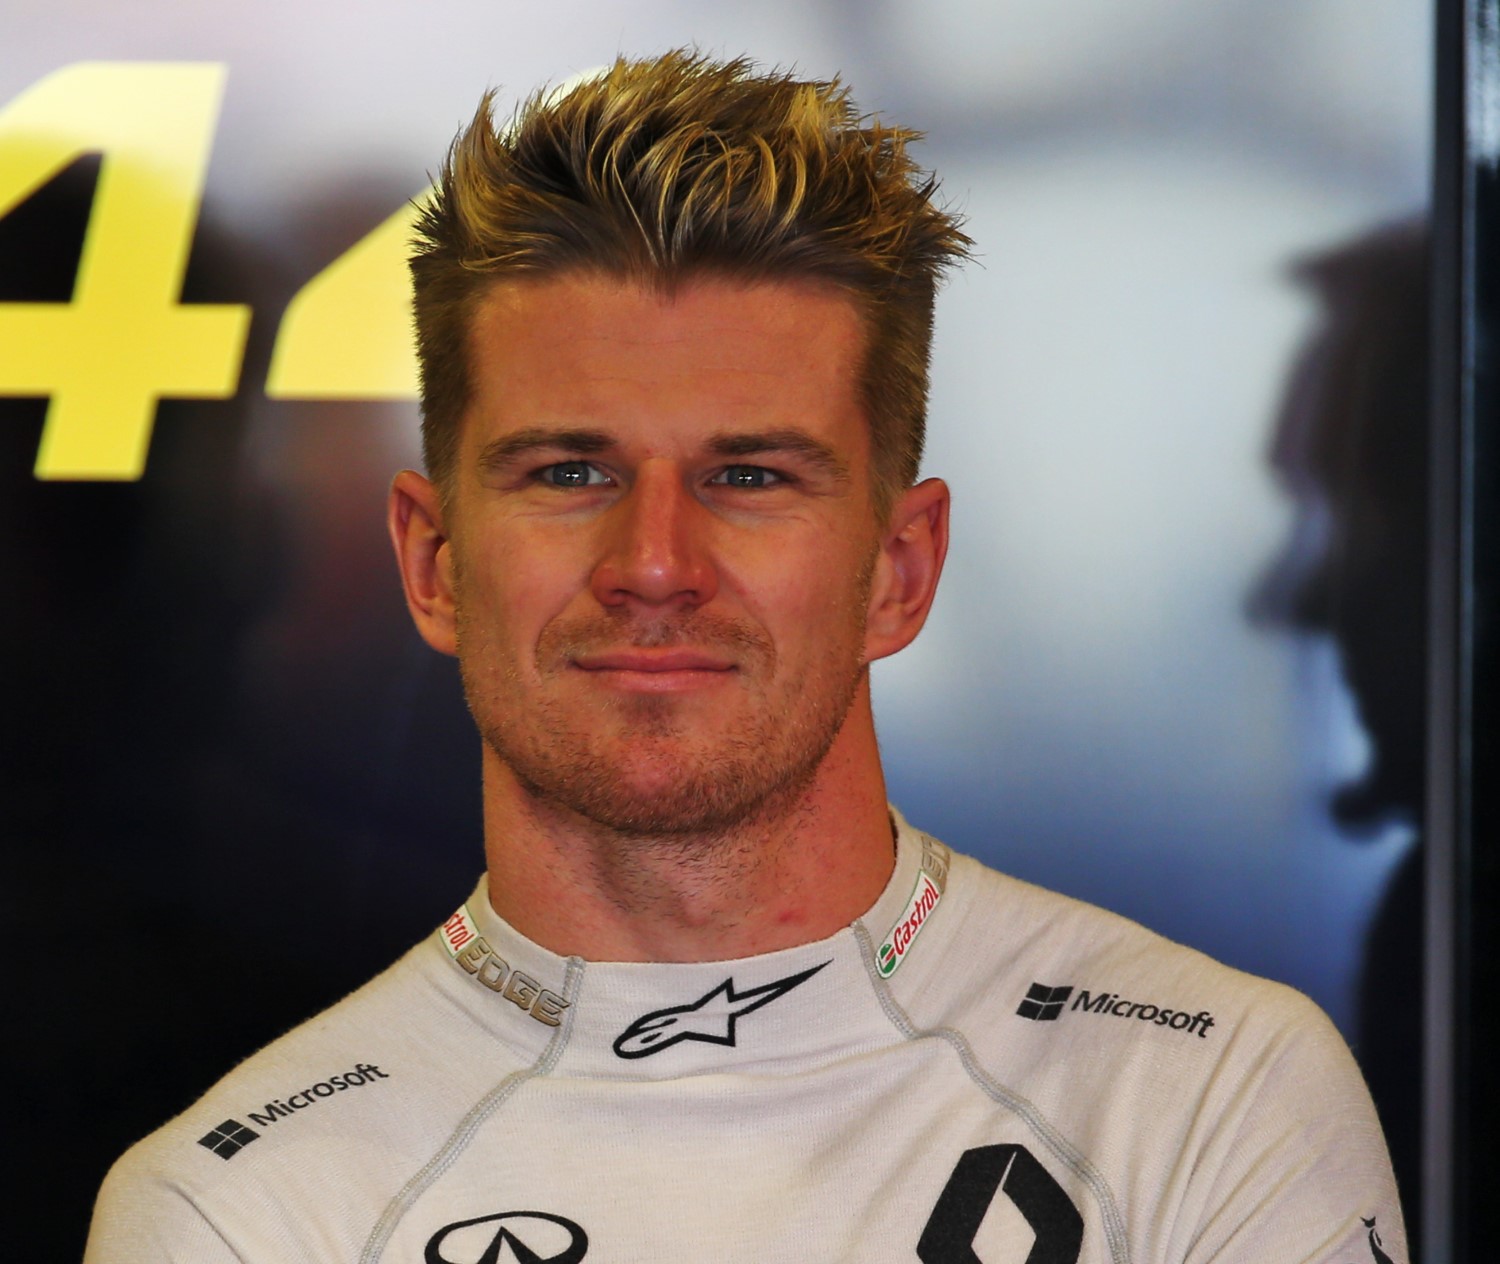 Nico Hulkenberg refuses to race in IndyCar - too unsafe. You figure the IndyCar chassis was designed in 2011 and rolled out in 2012. It's a 9-year old design